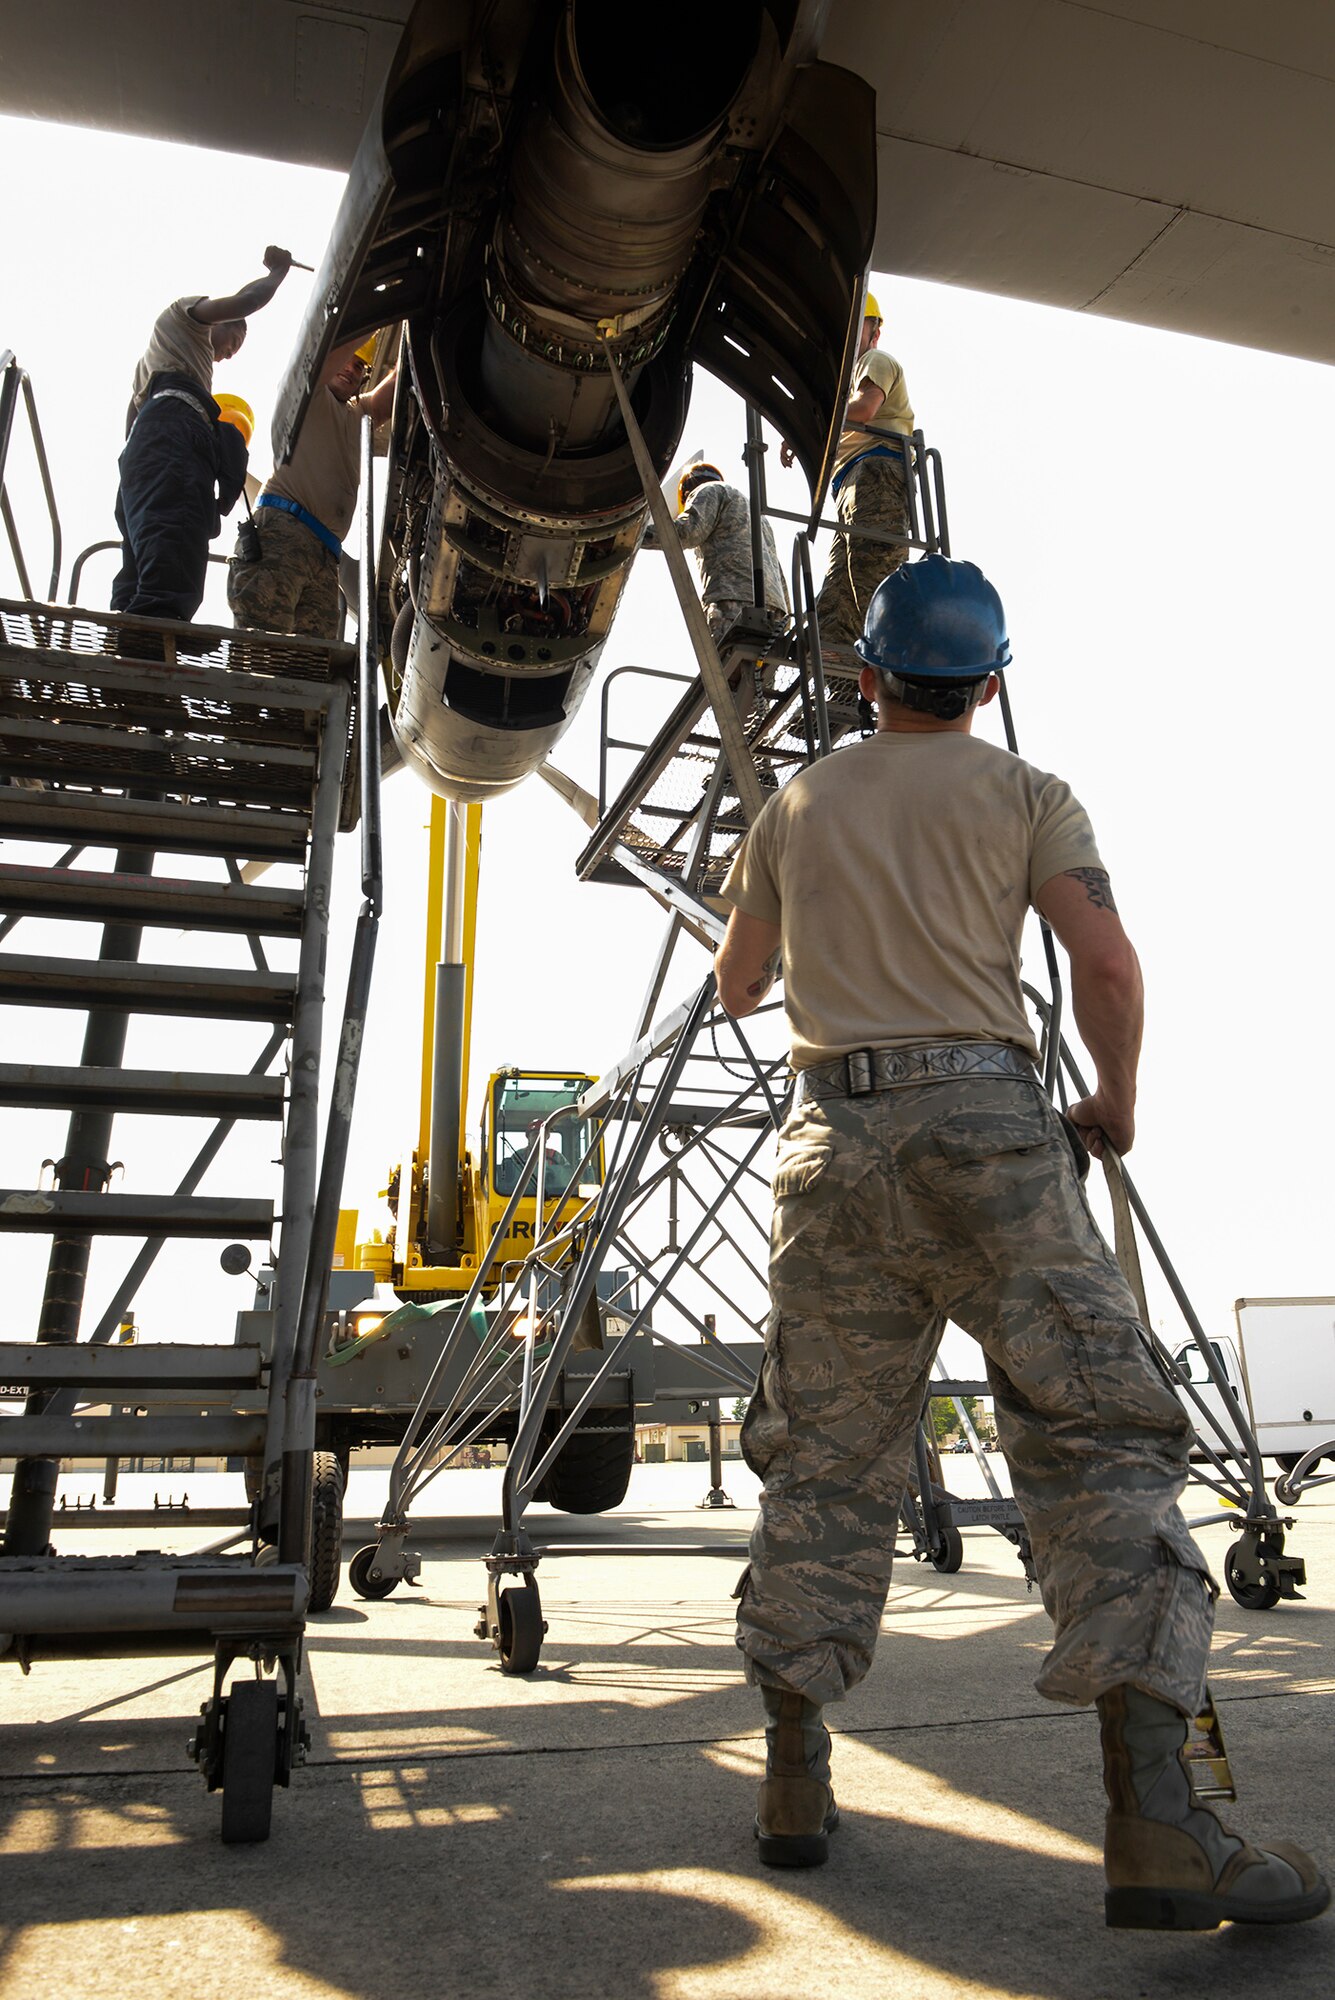 Staff Sgt. Dwayne Trett, aerospace propulsion craftsman with the 374th Maintenance Squadron, holds a strap to steady the engine of a C-130 Hercules, April 29, 2015 at Yokota Air Base, Japan. The process of removing the engine for repair took about 45 minutes of care and precision. (U.S. Air Force photo by Airman 1st Class Elizabeth Baker/Released)